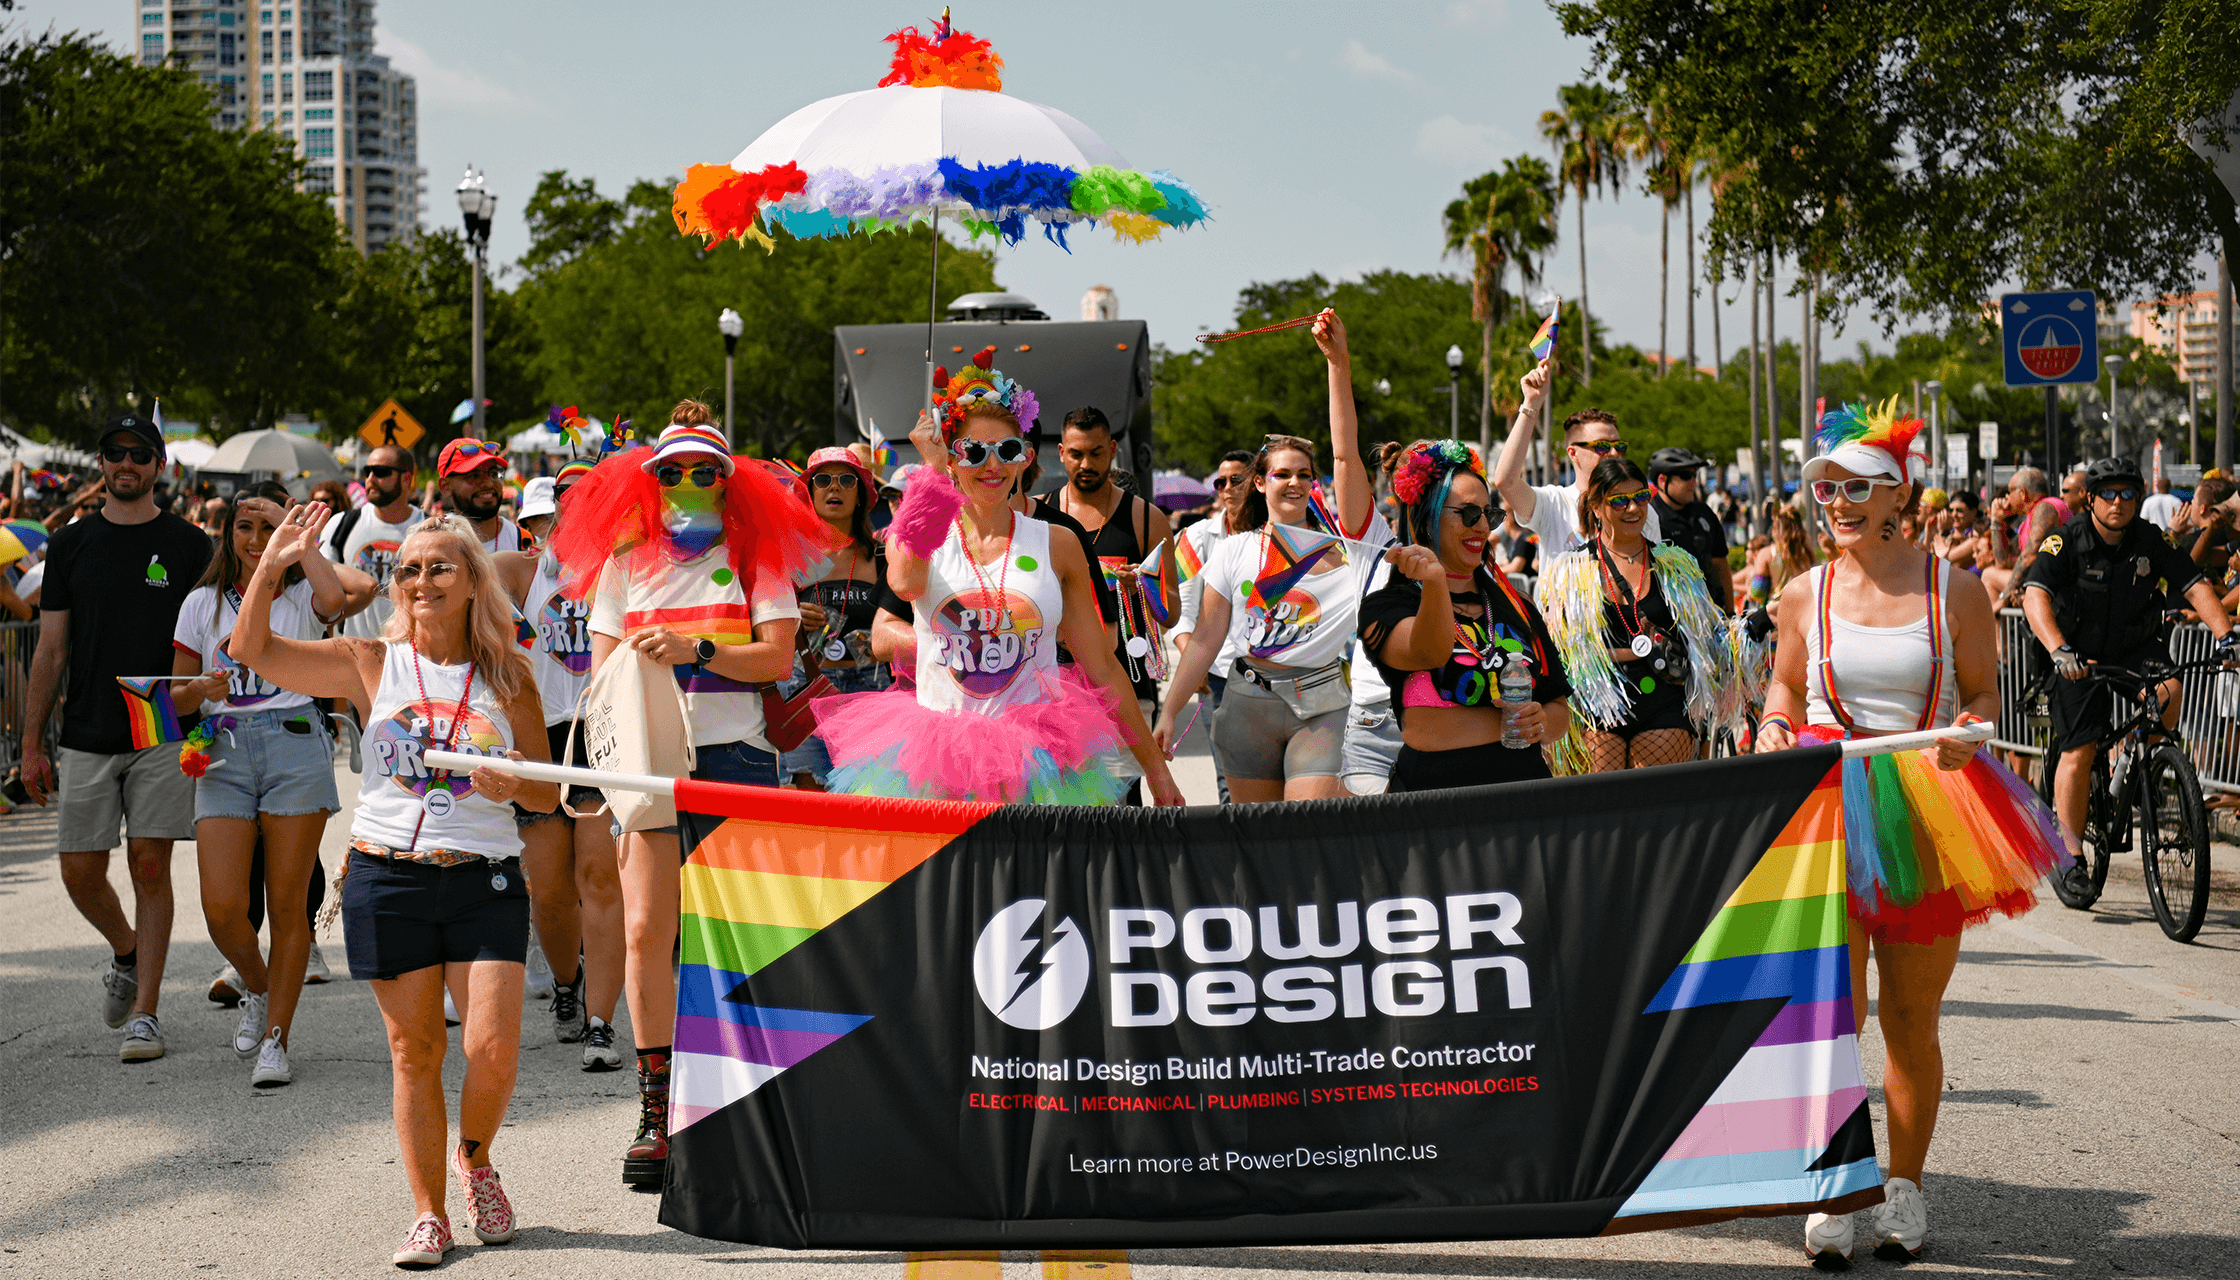 St. Pete Pride: A 20th Anniversary to Remember